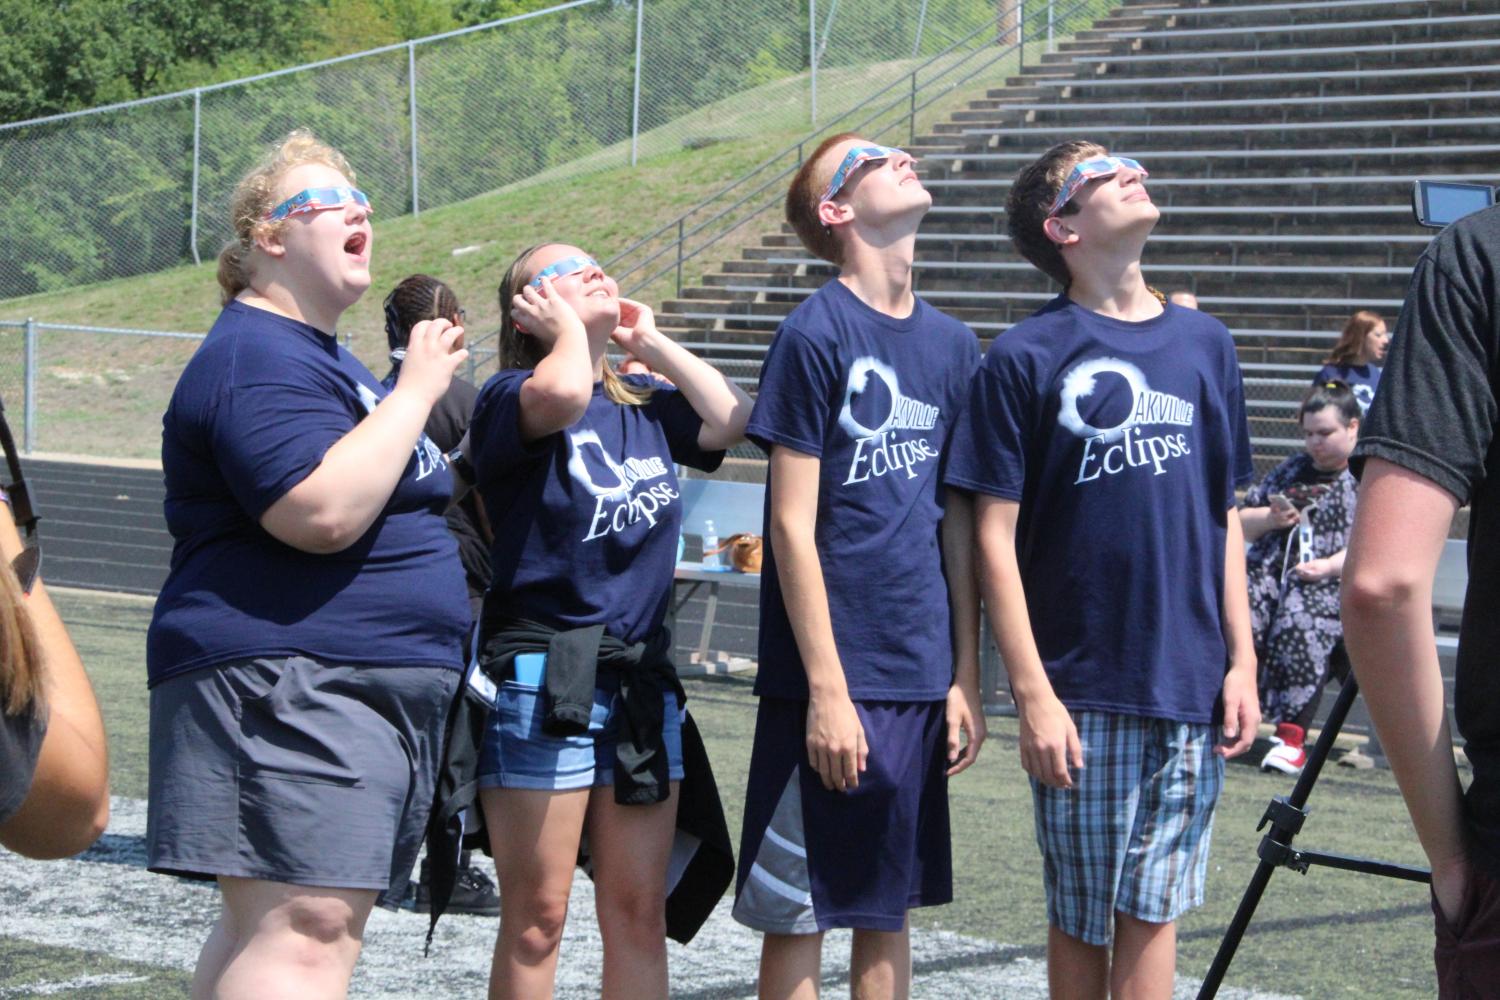 Wearing their eclipse shirts, a group of students looks up mesmerized by the eclipse.